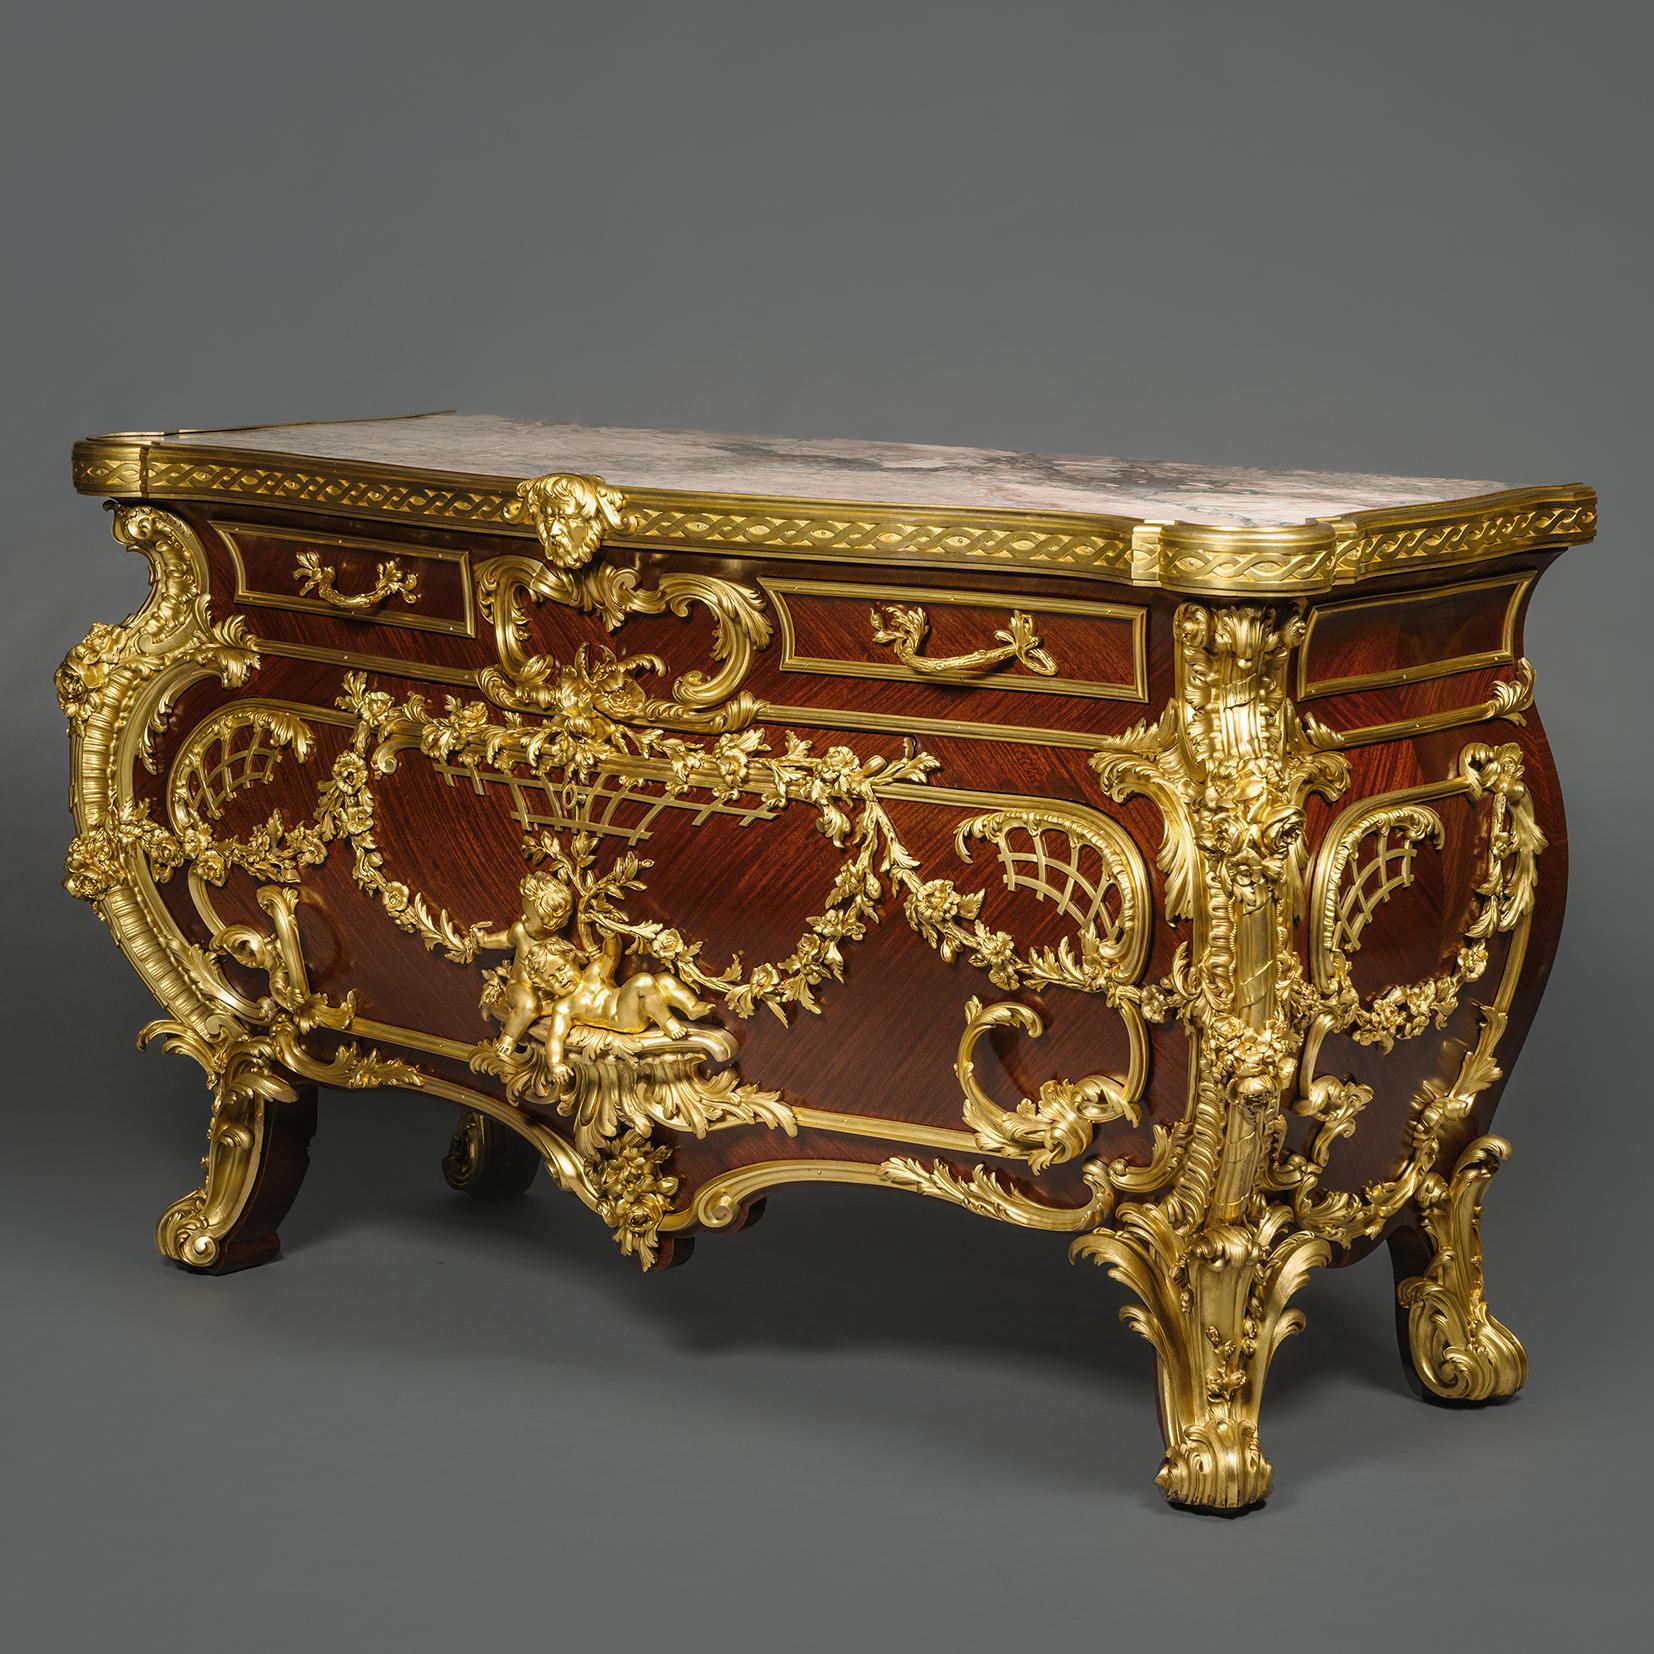 A Magnificent Rococo Style Gilt-Bronze, Bois Satiné and Mahogany Commode.
By Rosel, Brussels, After The Celebrated Model By Johann Melchoir Kambli. 

Of curvaceous bombé form surmounted by a green and pink veined Campan Pyrénées marble within a